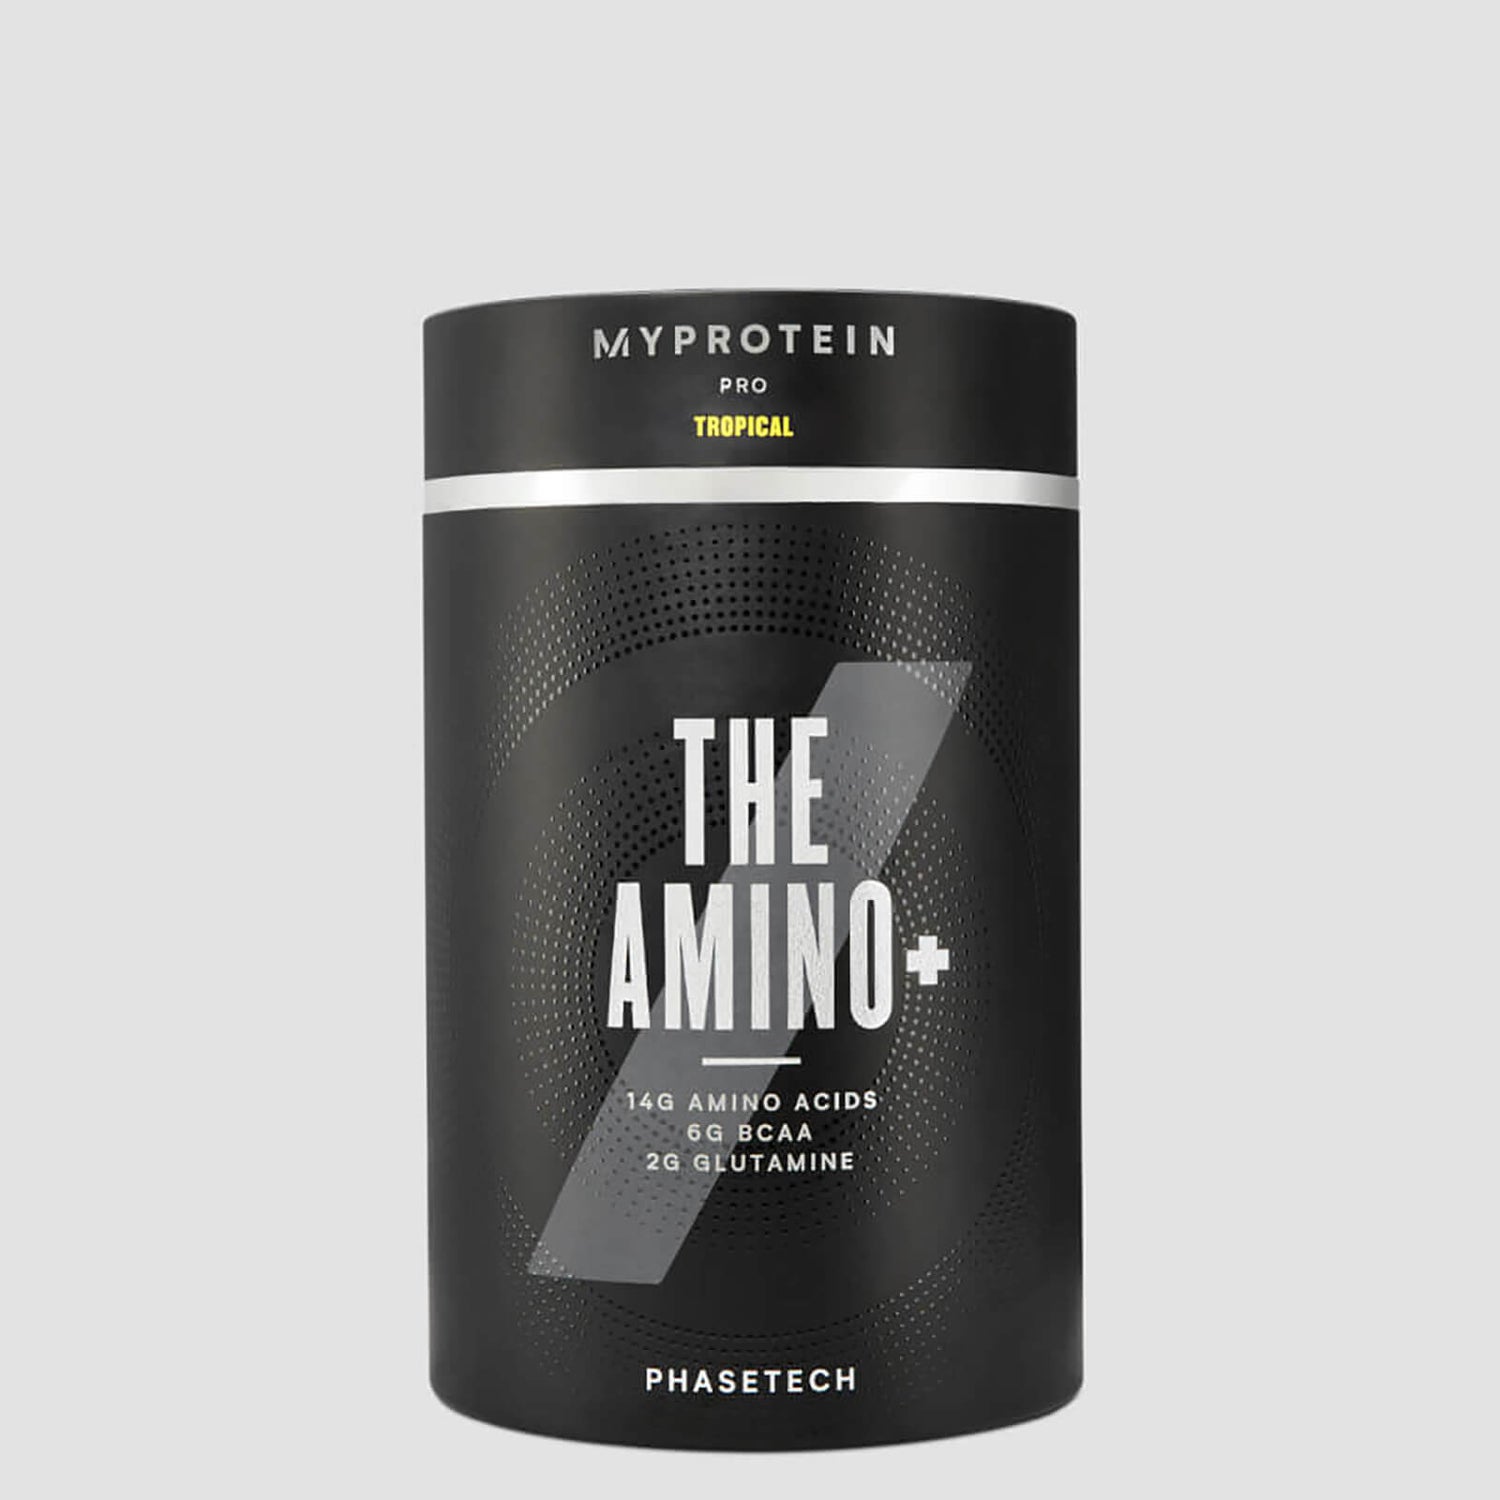 THE Amino+ with PhaseTech - 20servings - Tropical